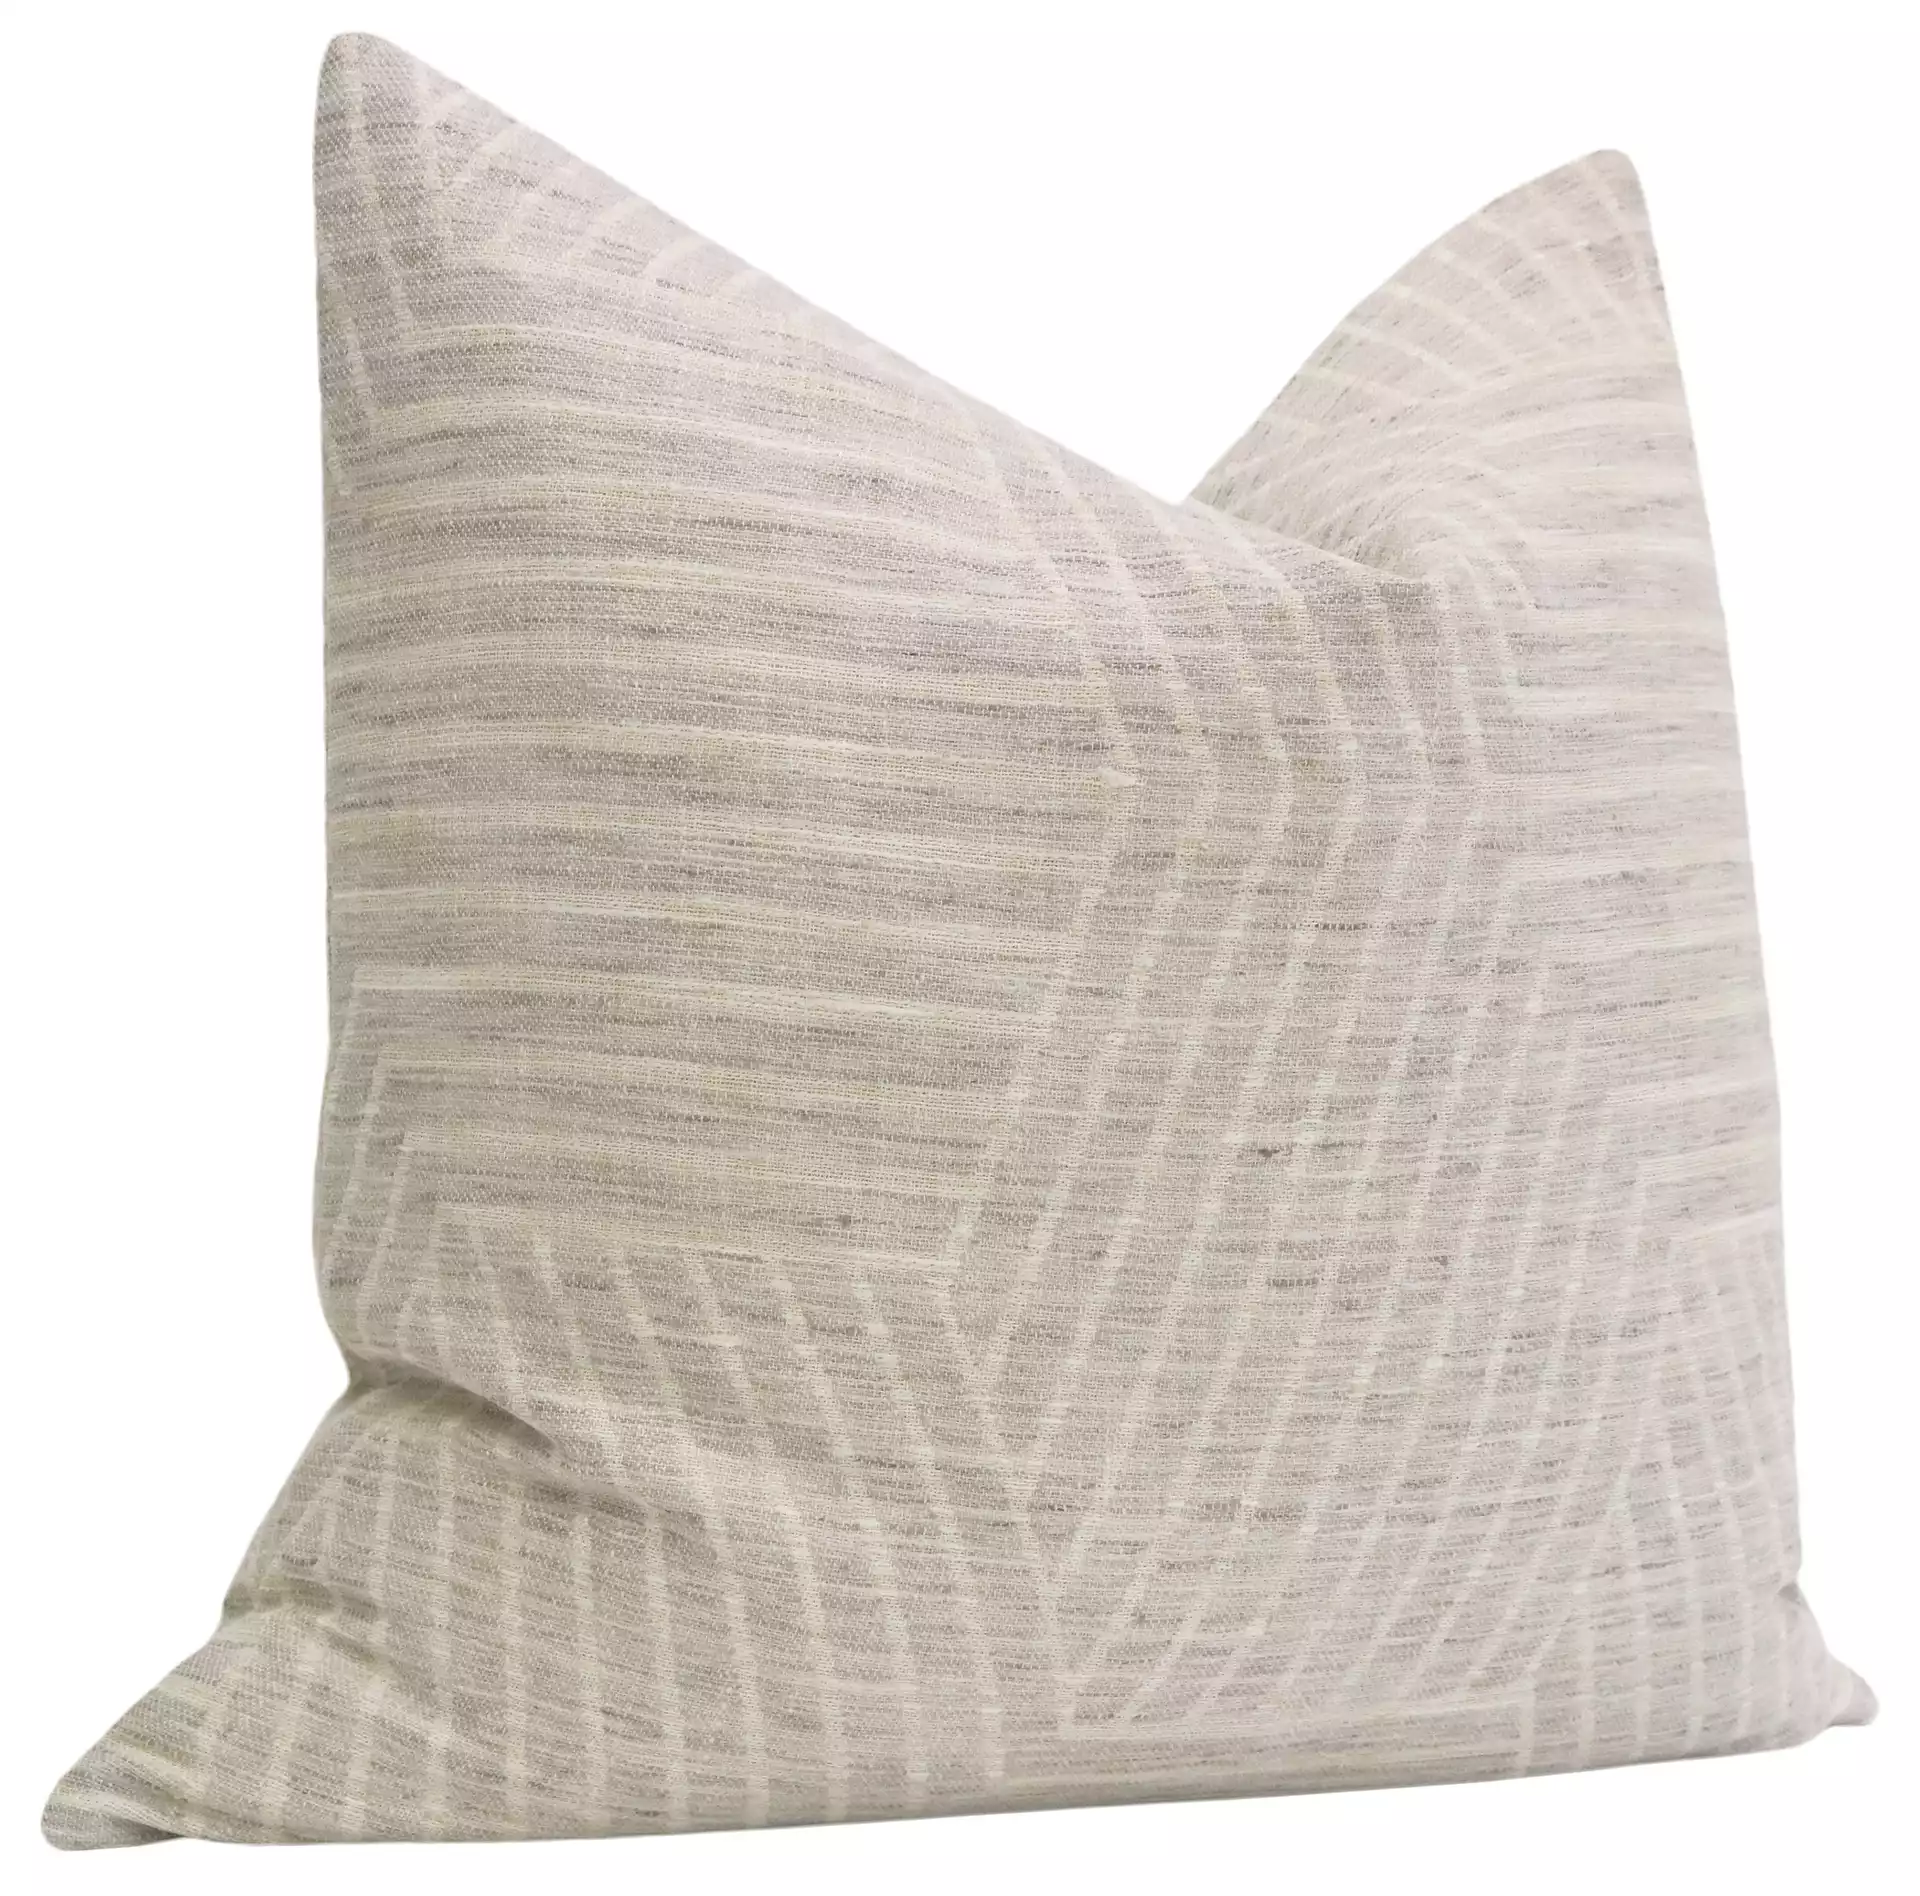 Labyrinth Linen Pillow Cover, Oyster, 18" x 18"